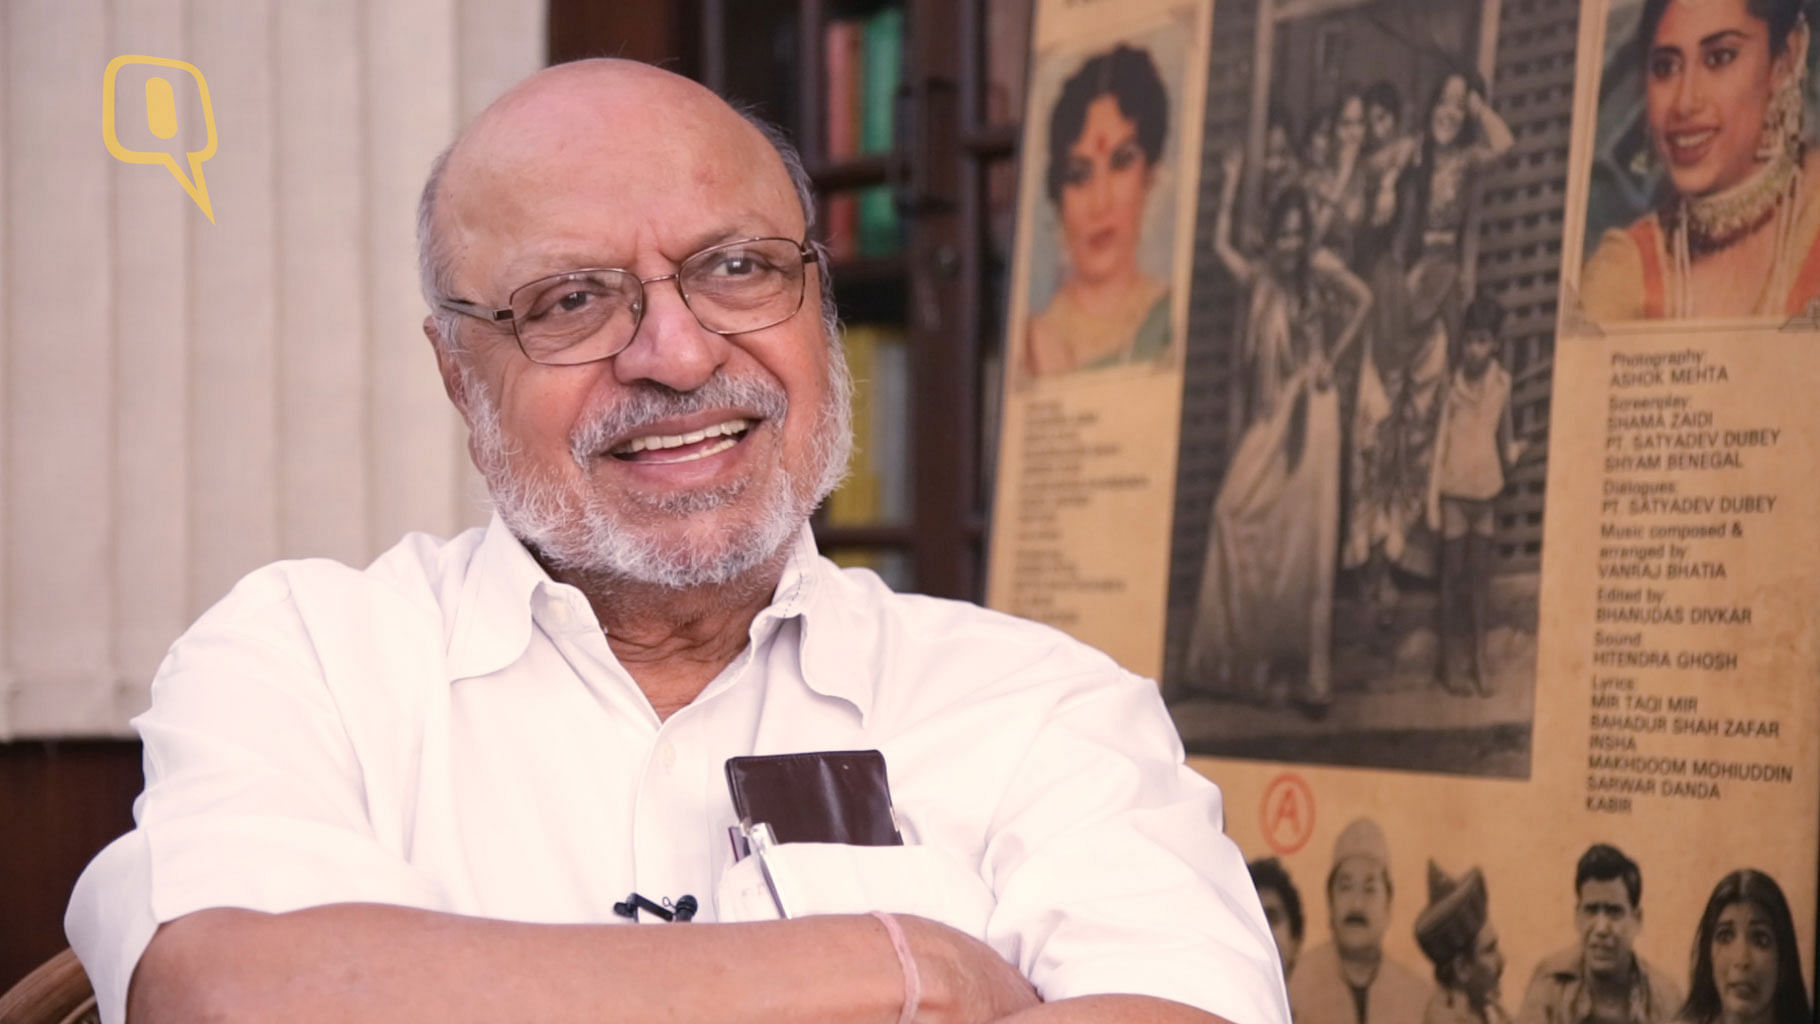 Noted filmaker Shyam Benegal. (Photo: <b>The Quint</b>)